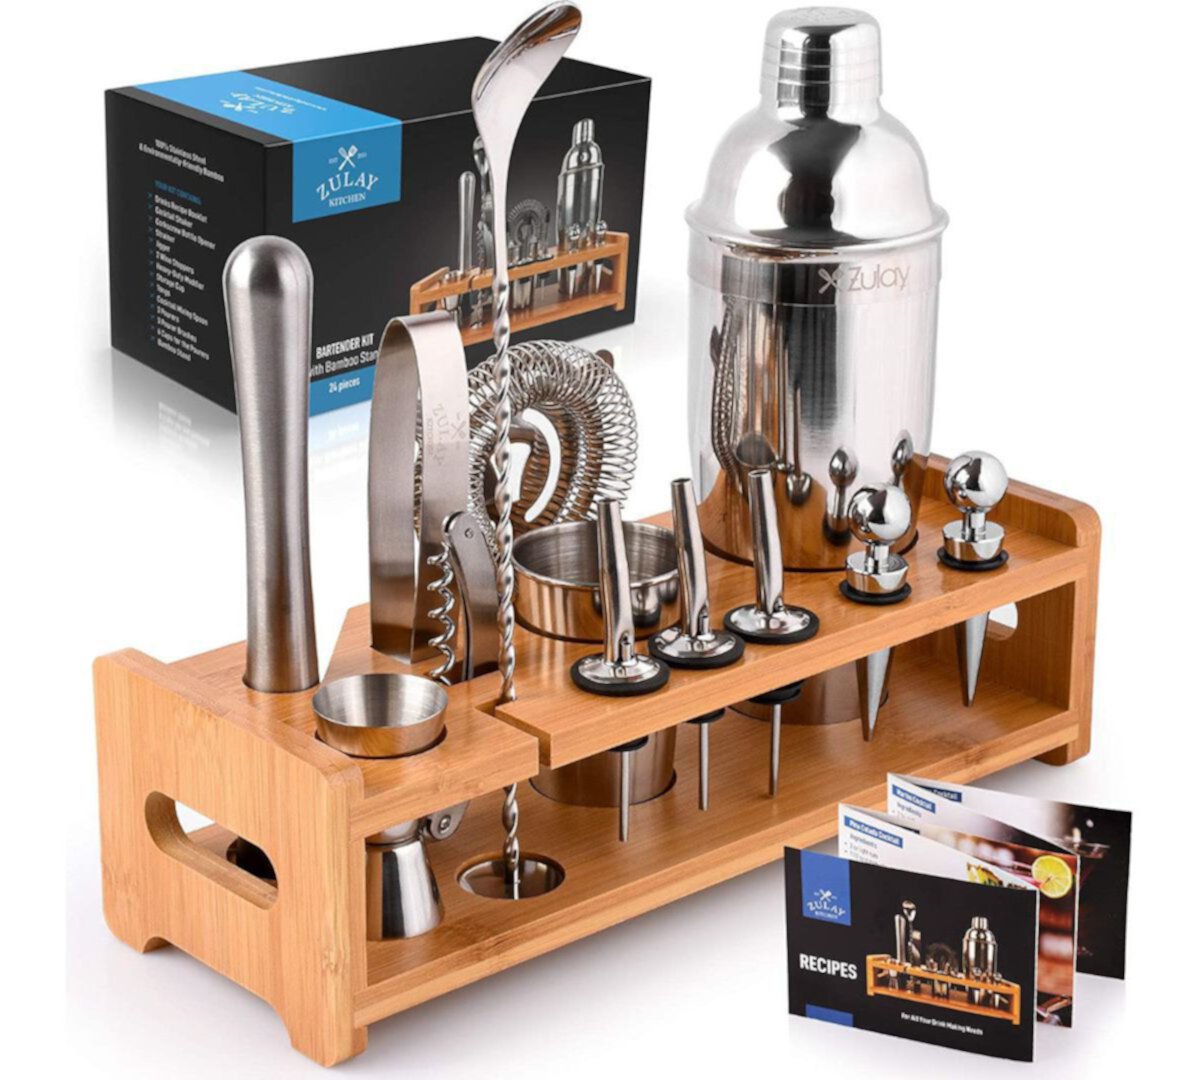 Complete Bartender Kit - 24-Piece Stainless Steel Kit with Jigger, Cocktail Shaker, Bamboo Holder Zulay